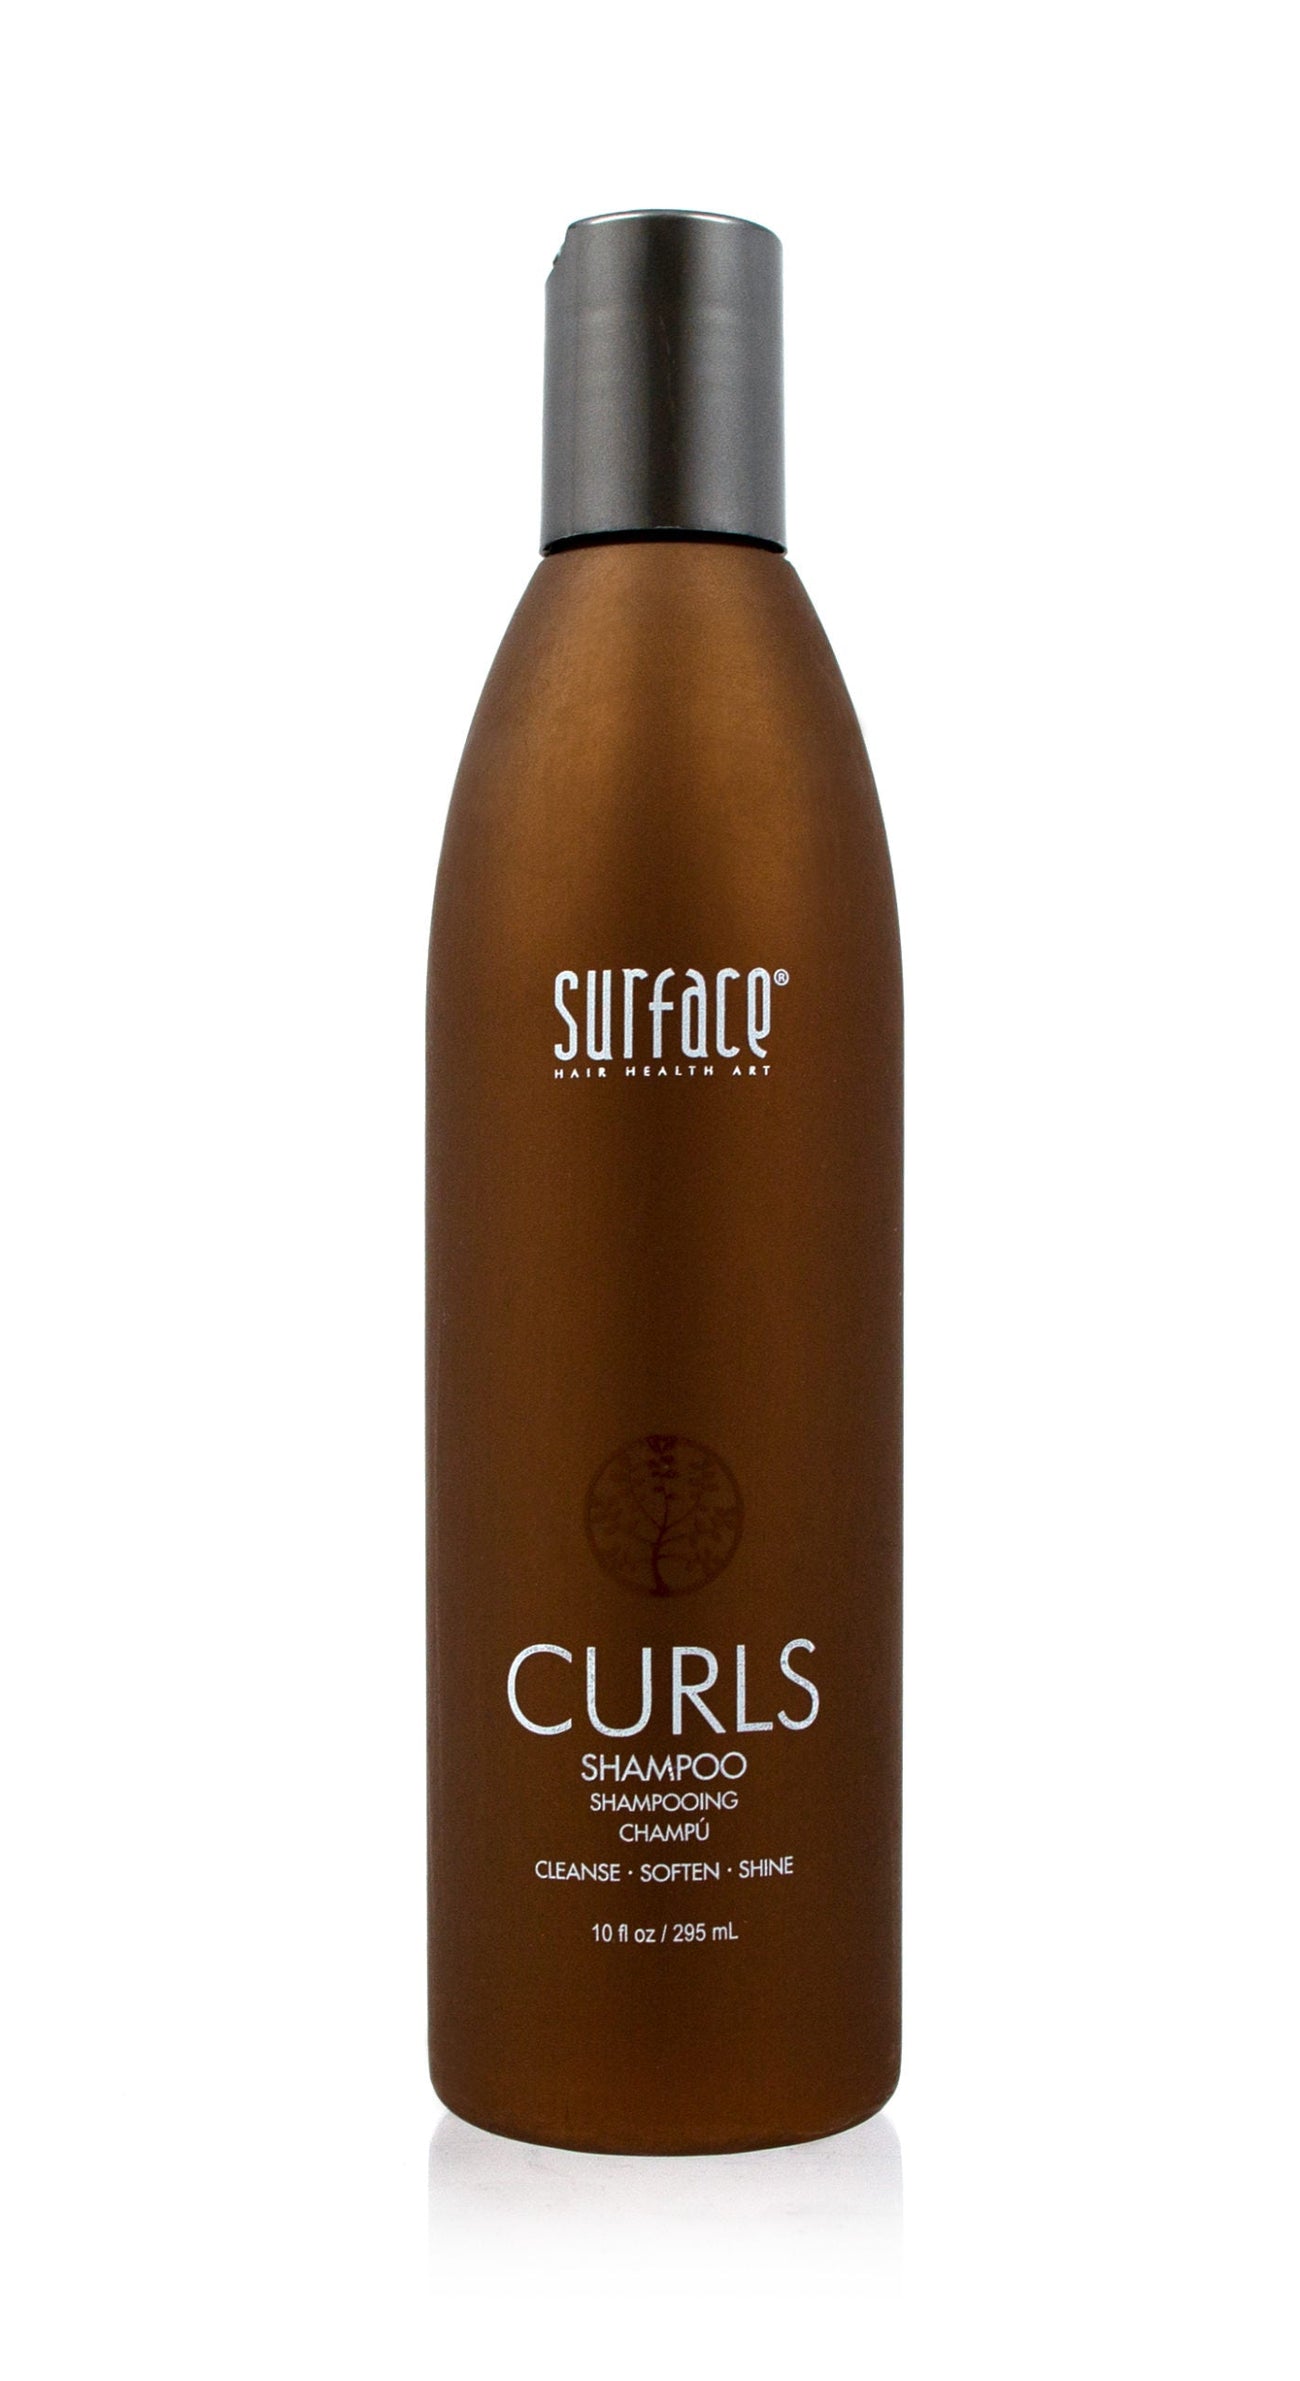 Surface Hair Curls Shampoo 10 oz. at Forever Young 1